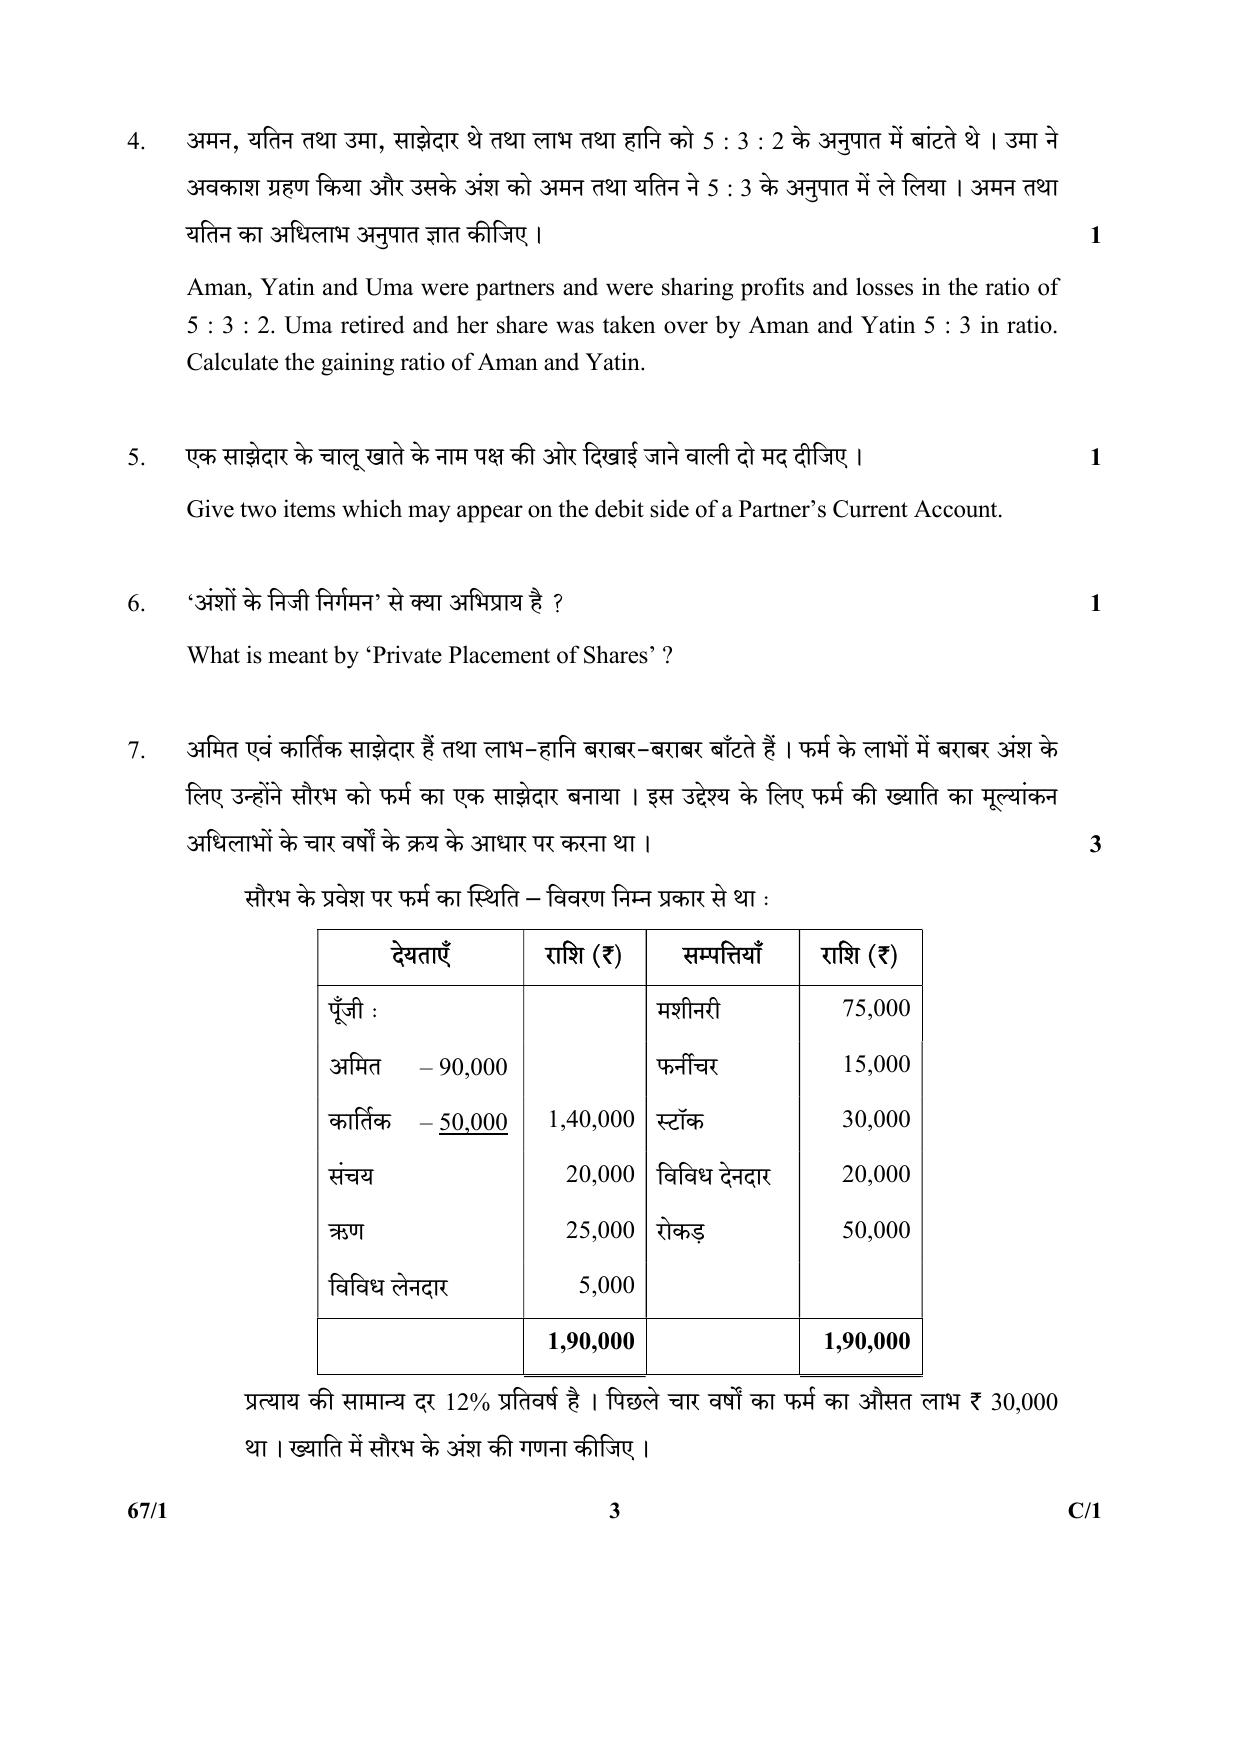 CBSE Class 12 67-1  (Accountancy) 2018 Compartment Question Paper - Page 3